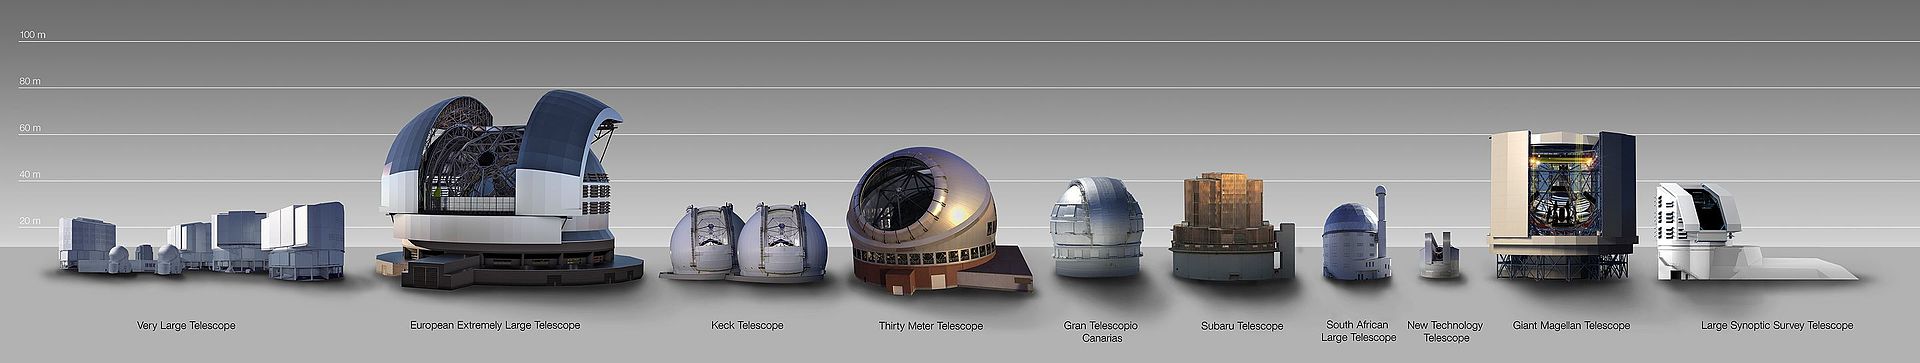 size_comparison_between_the_e-elt_and_other_telescope_domes.jpg